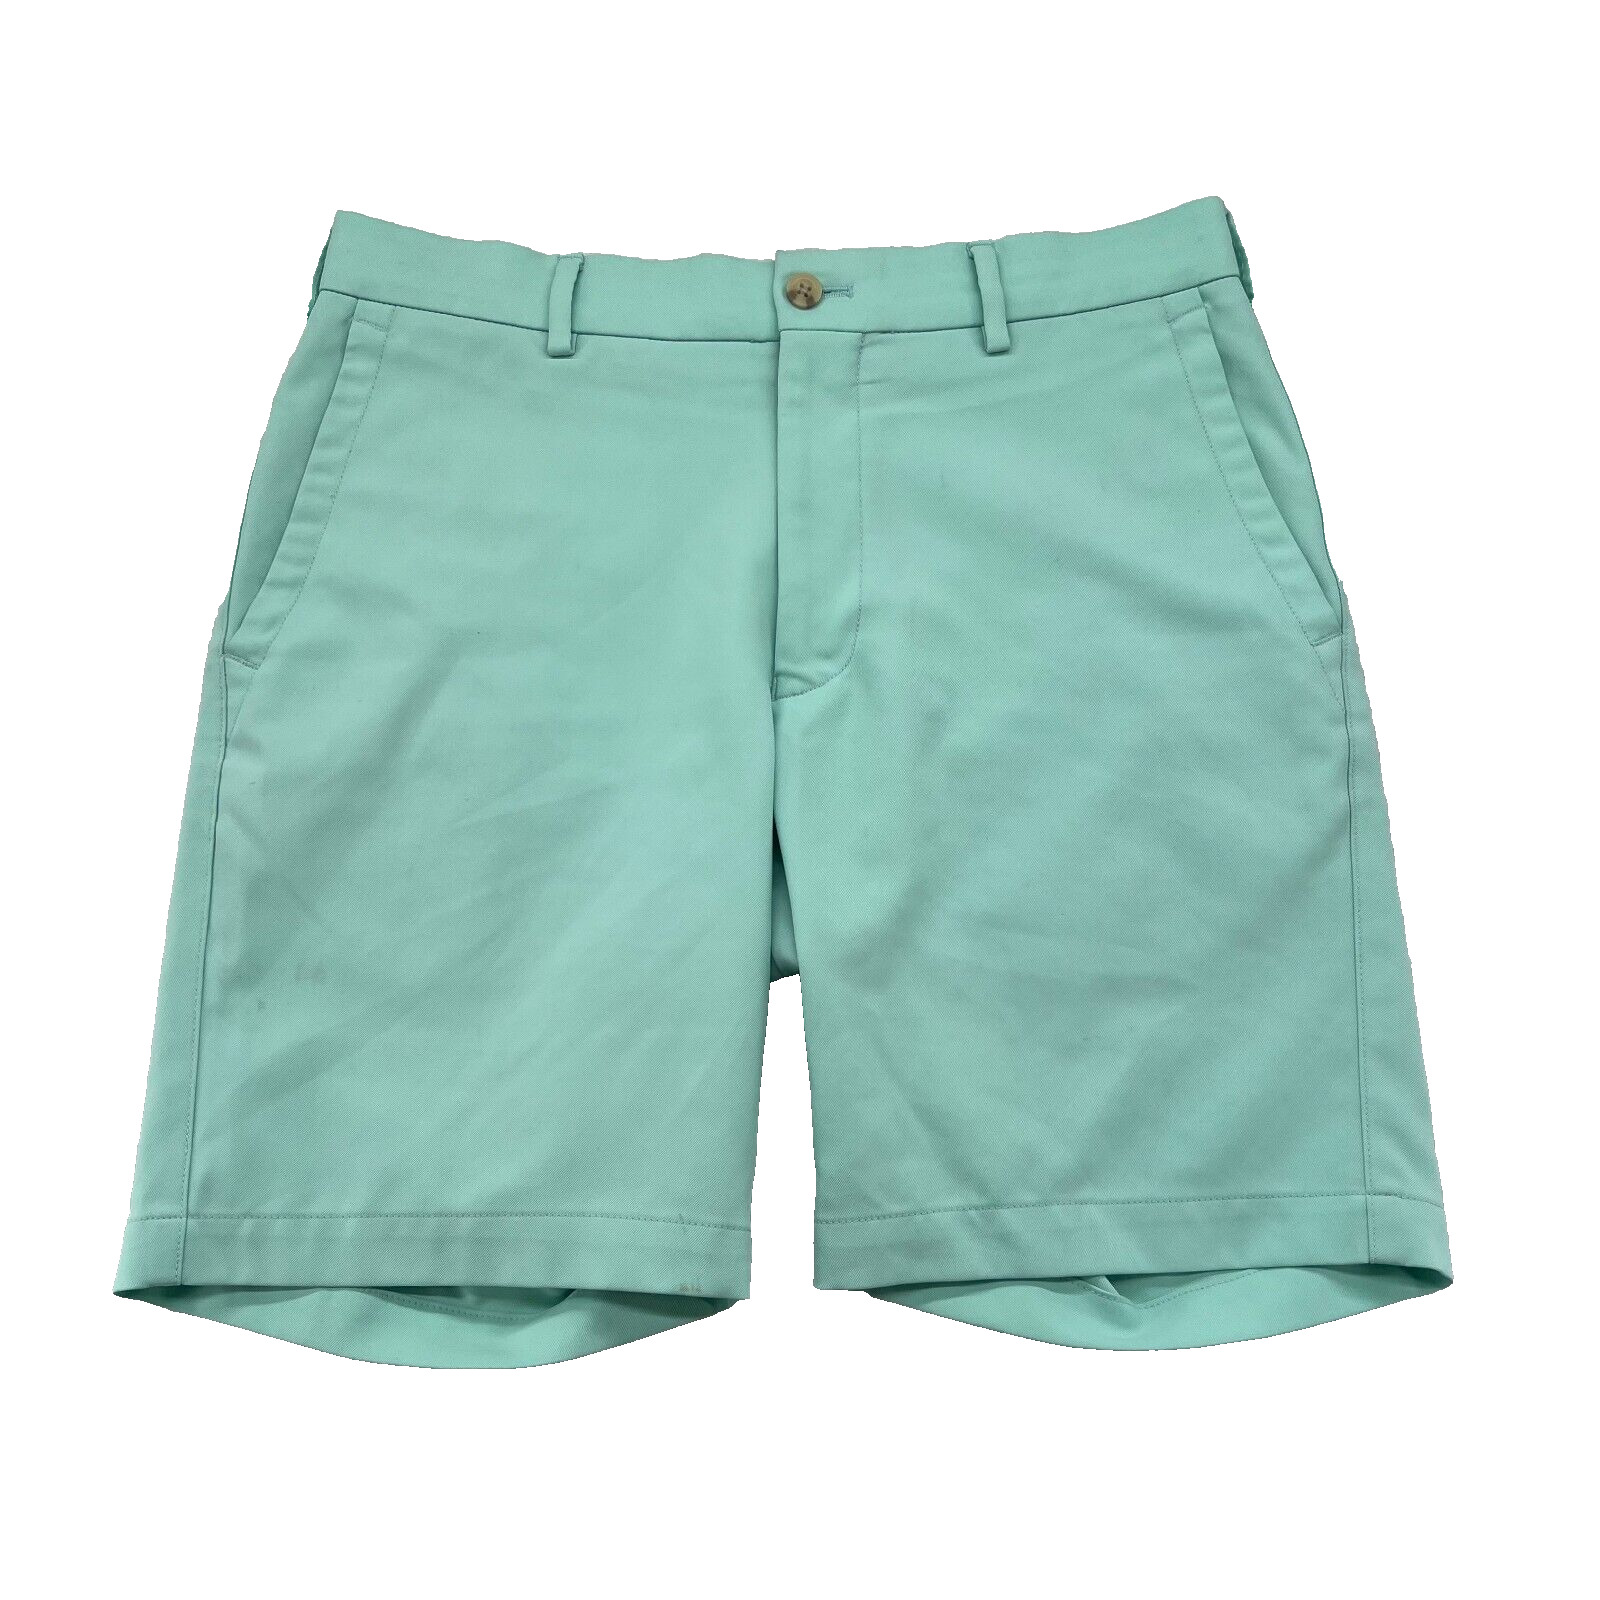 Peter Millar Chino Shorts Men’s Performance Casual Teal Green Size 30 *FLAWS*